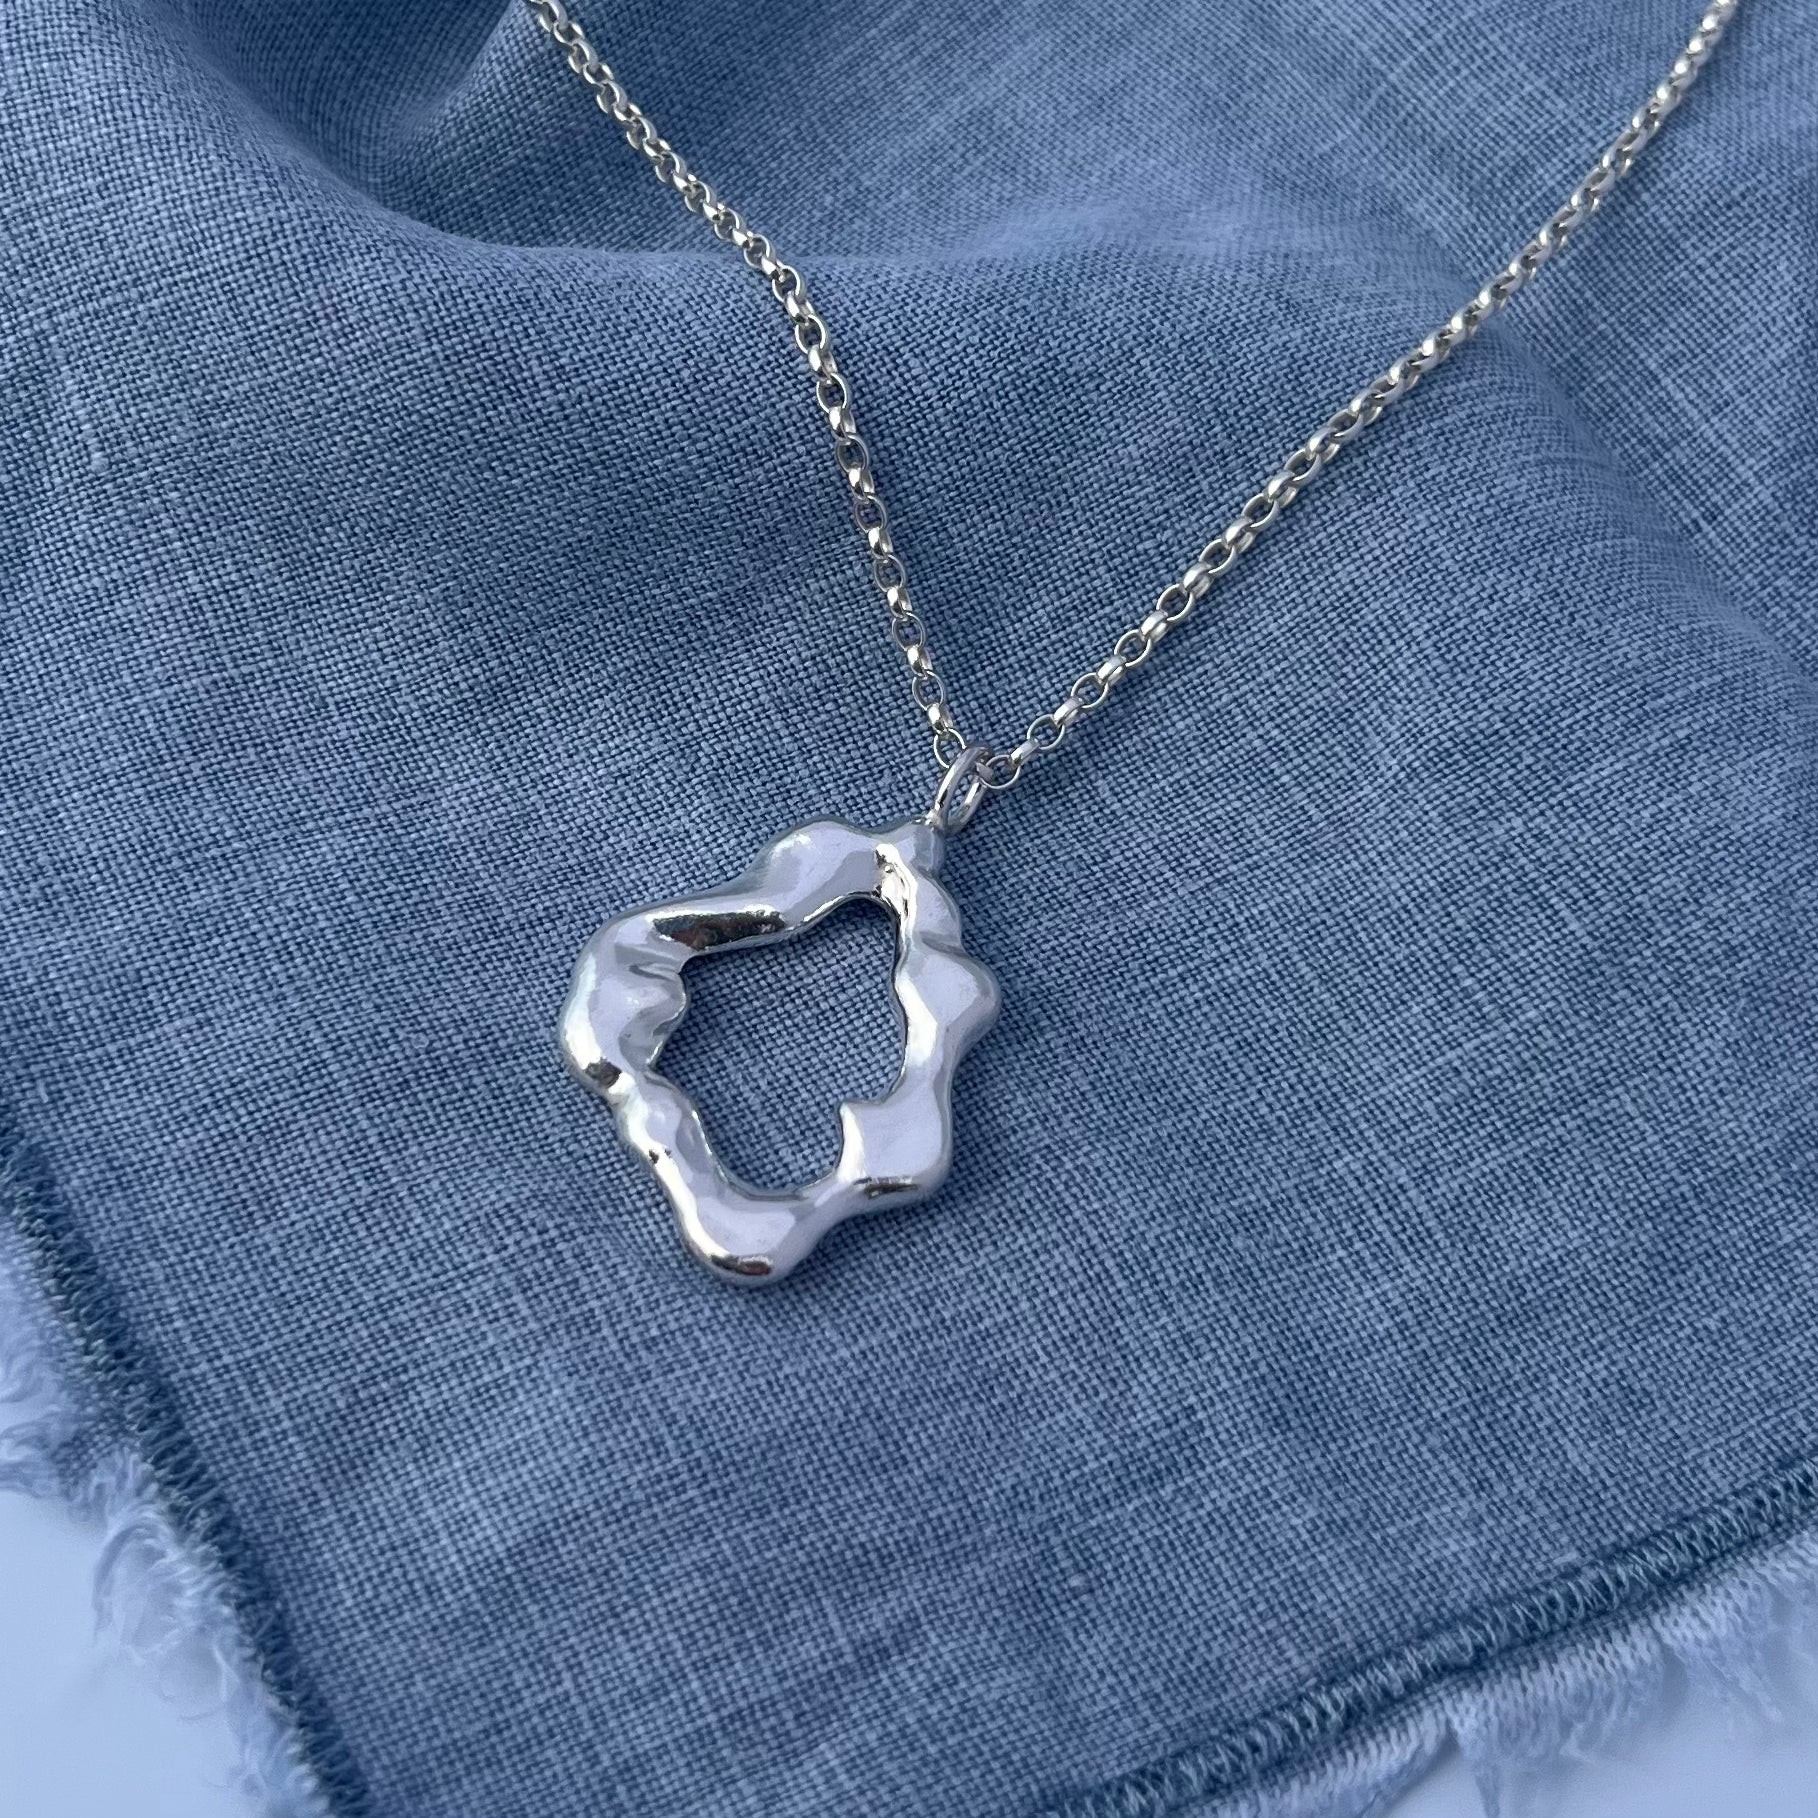 The 'Mist pendant'. A sterling silver abstract shaped pendant on a silver belcher chain. The background is blue linen.